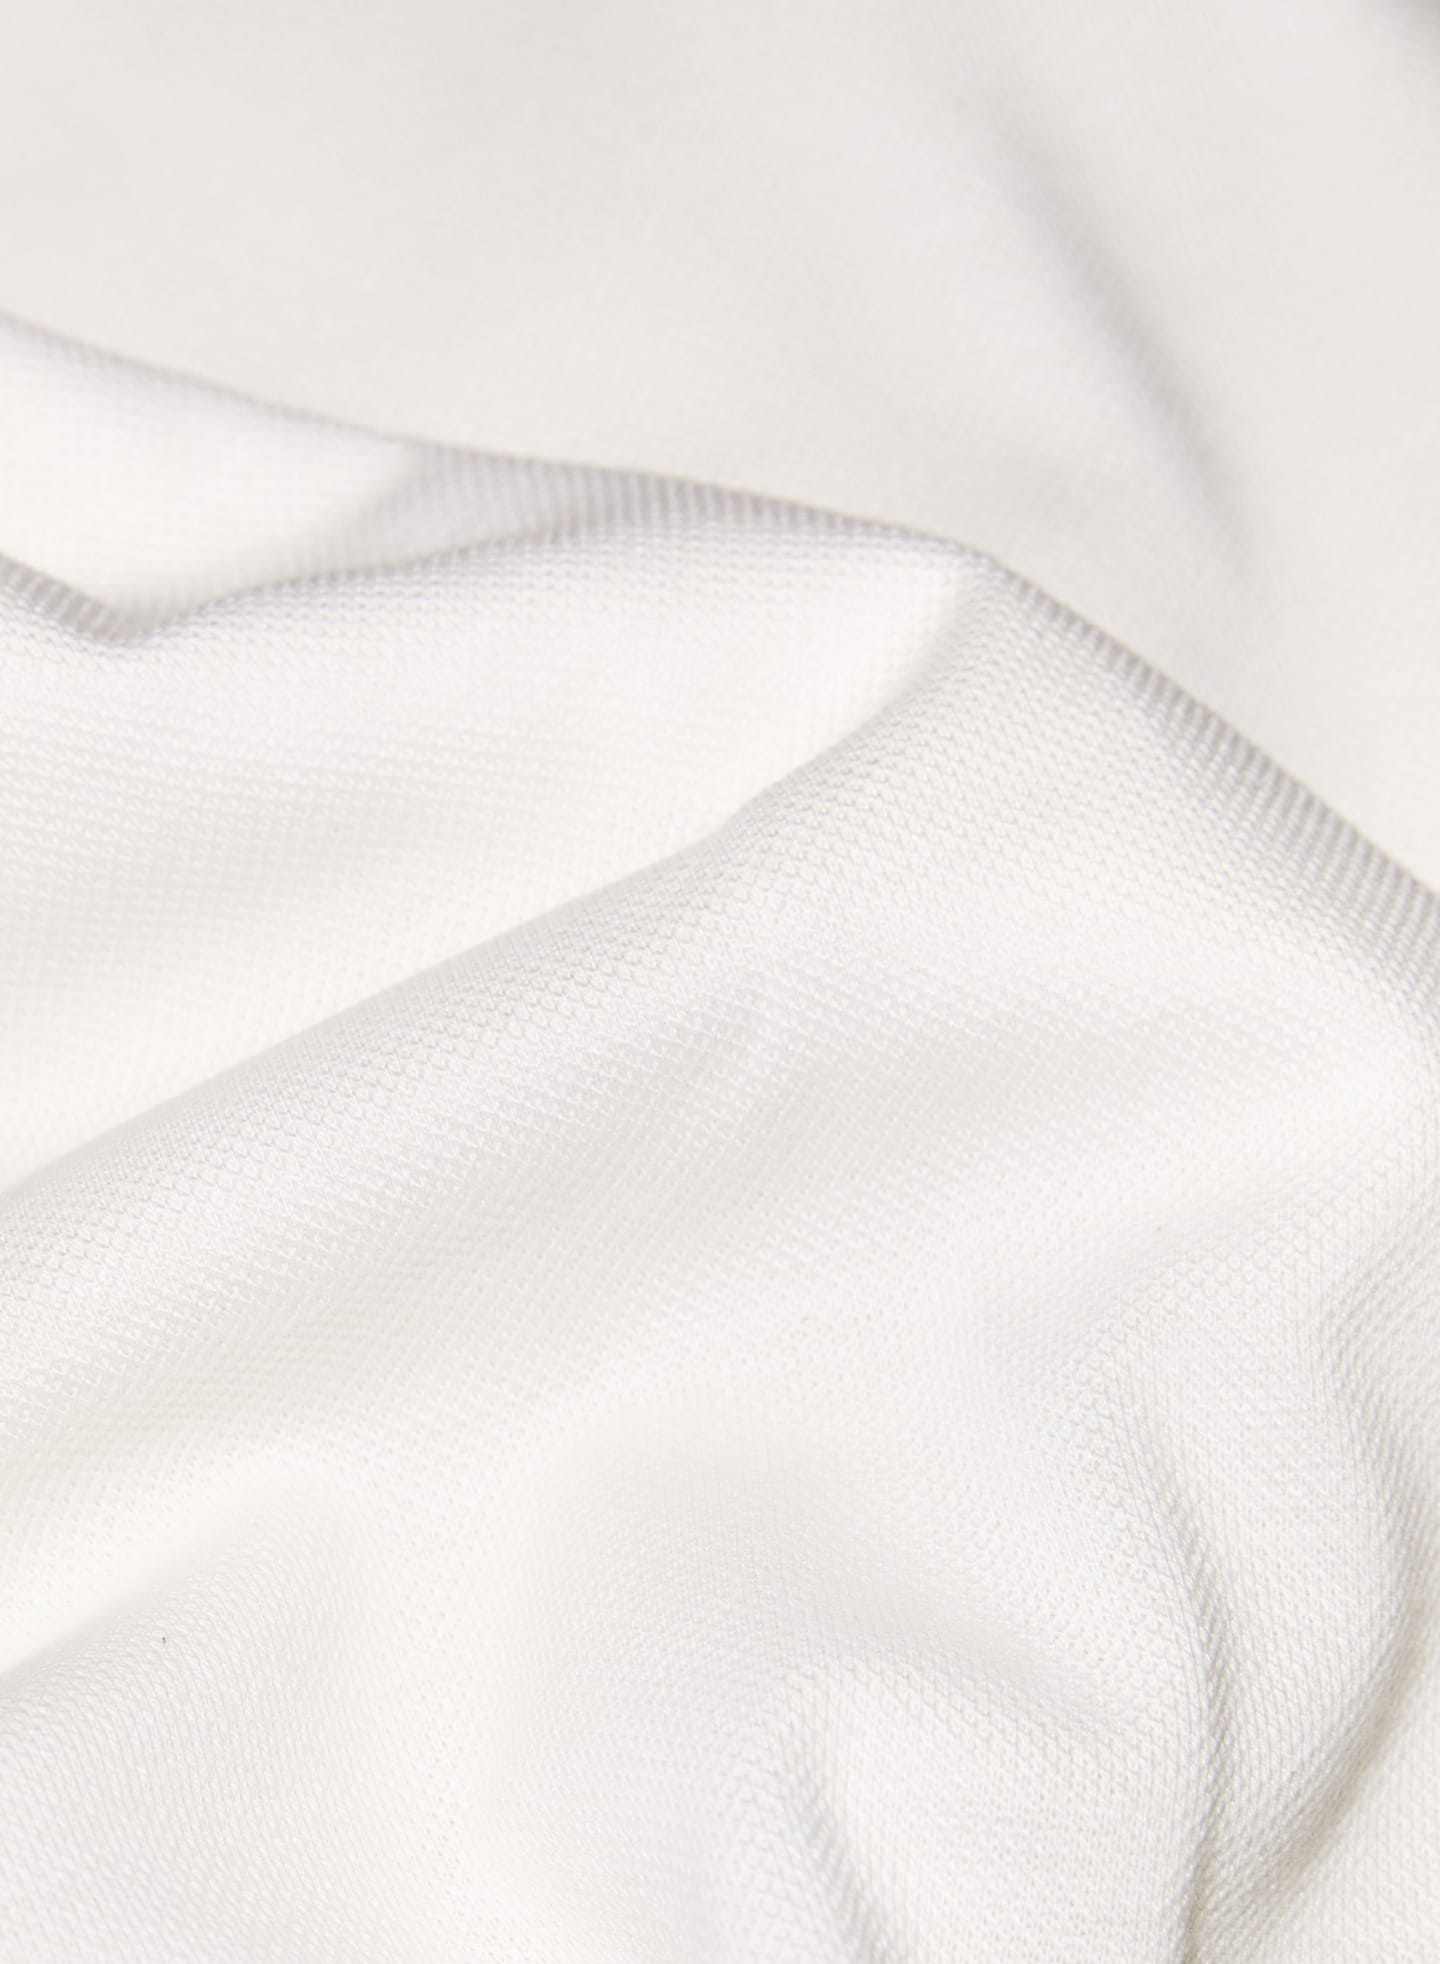 Suitsupply white pique fabric primarily used for polo shirts.